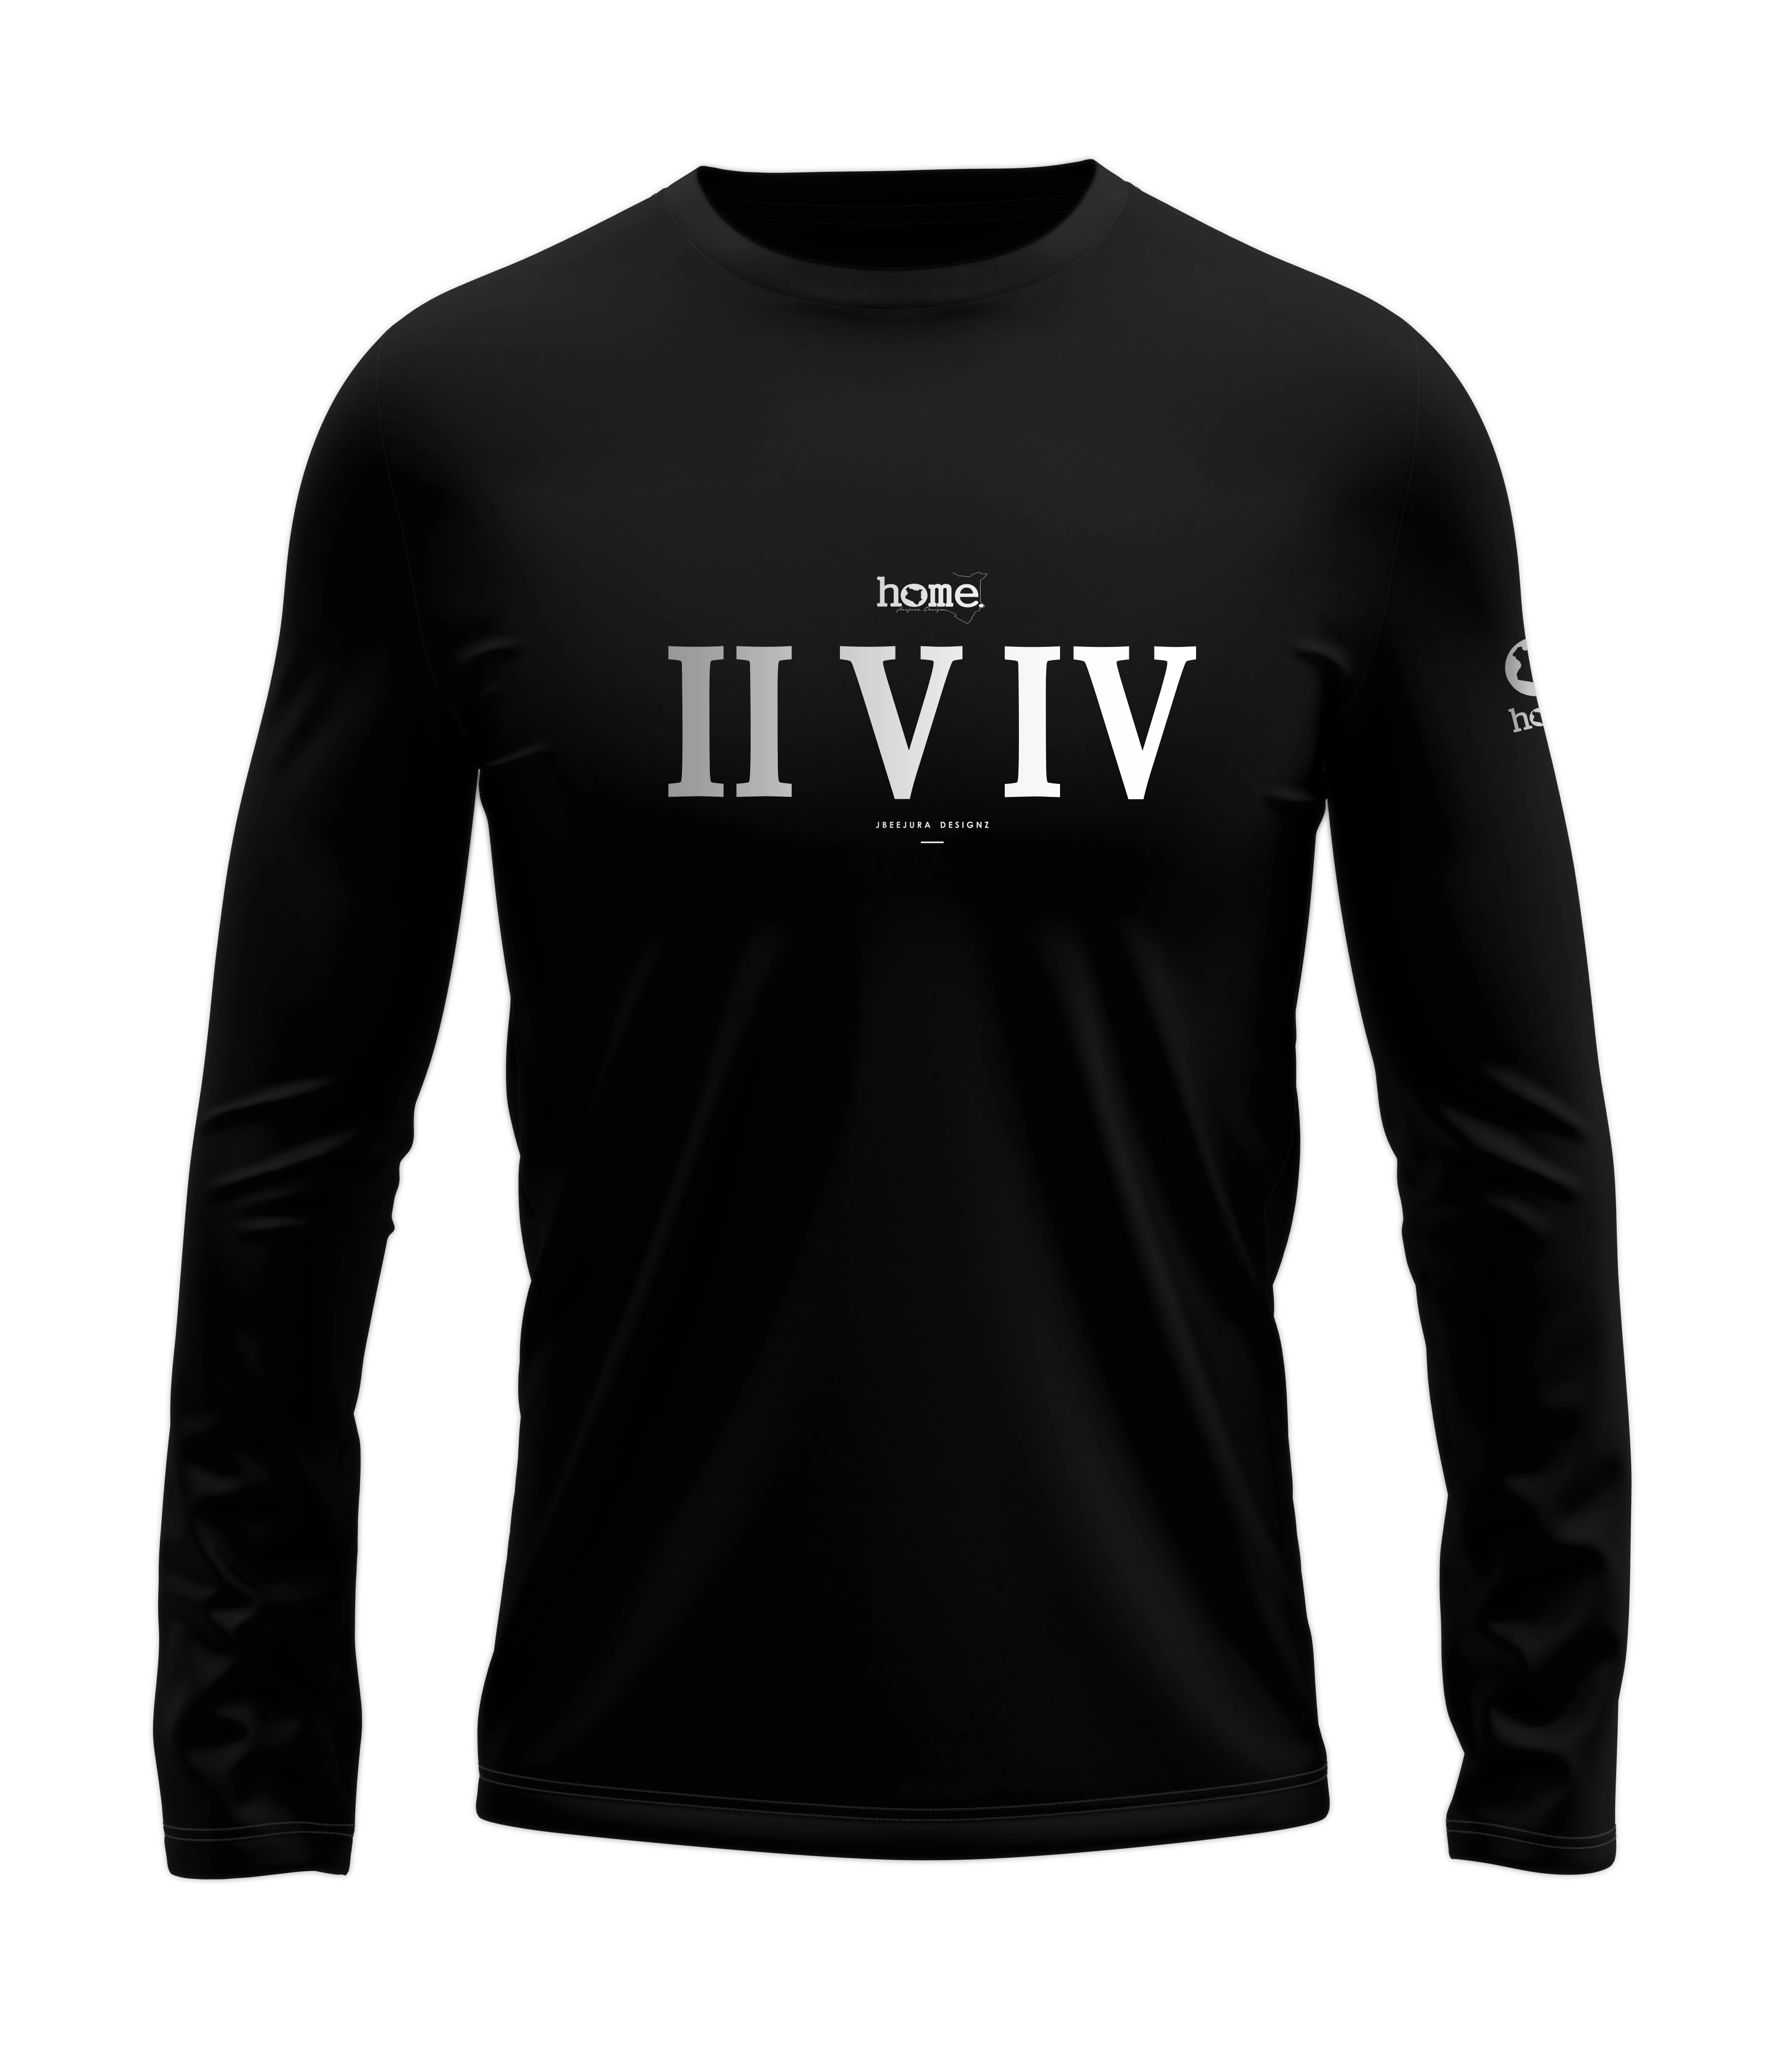 home_254 LONG-SLEEVED BLACK T-SHIRT WITH A SILVER ROMAN NUMERALS PRINT – COTTON PLUS FABRIC